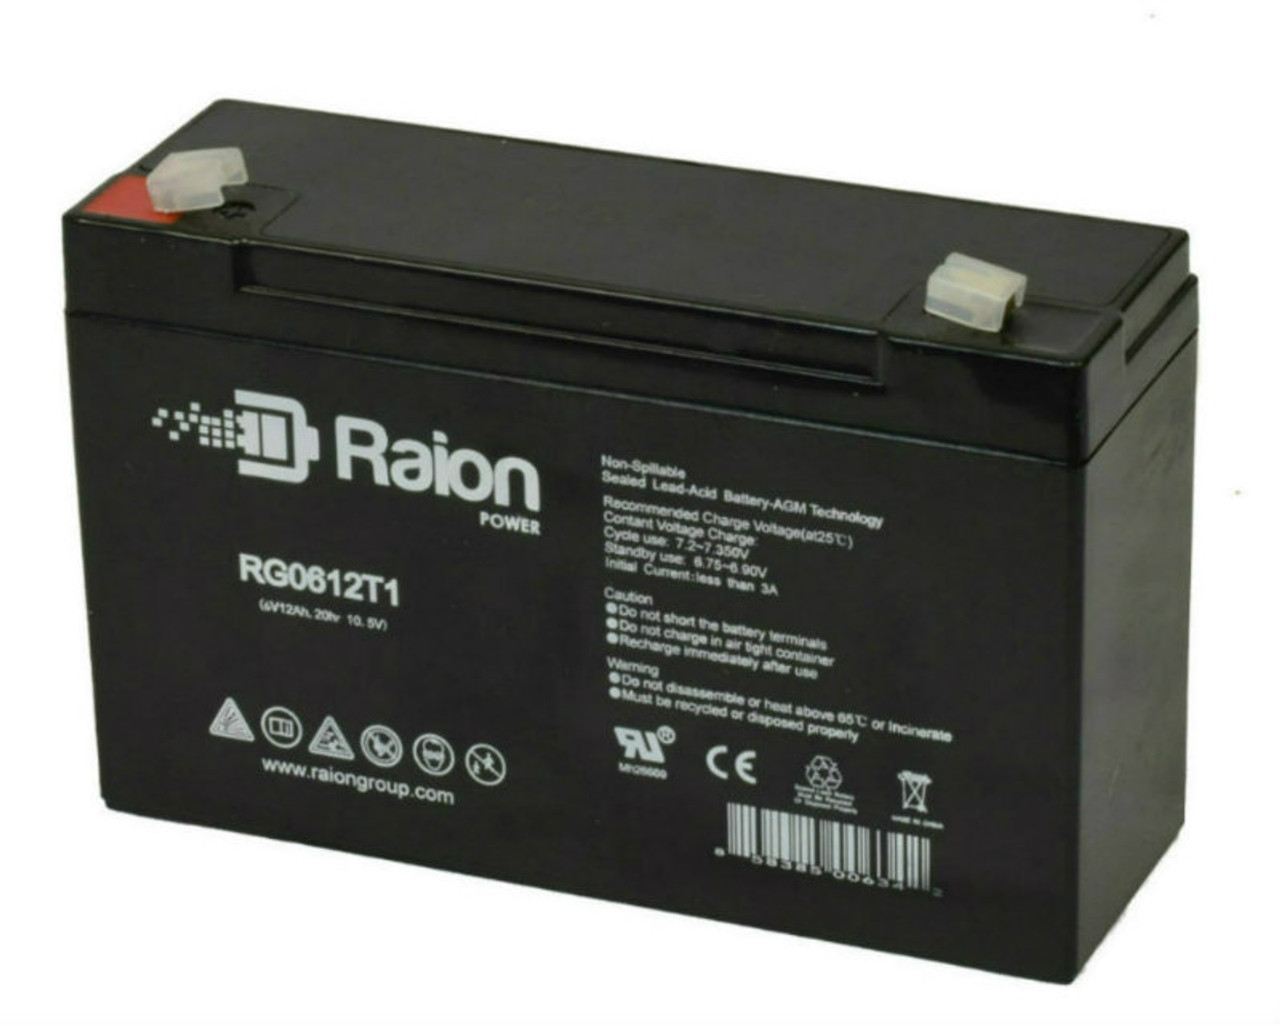 Raion Power RG06120T1 Replacement Battery for SES BT10-6